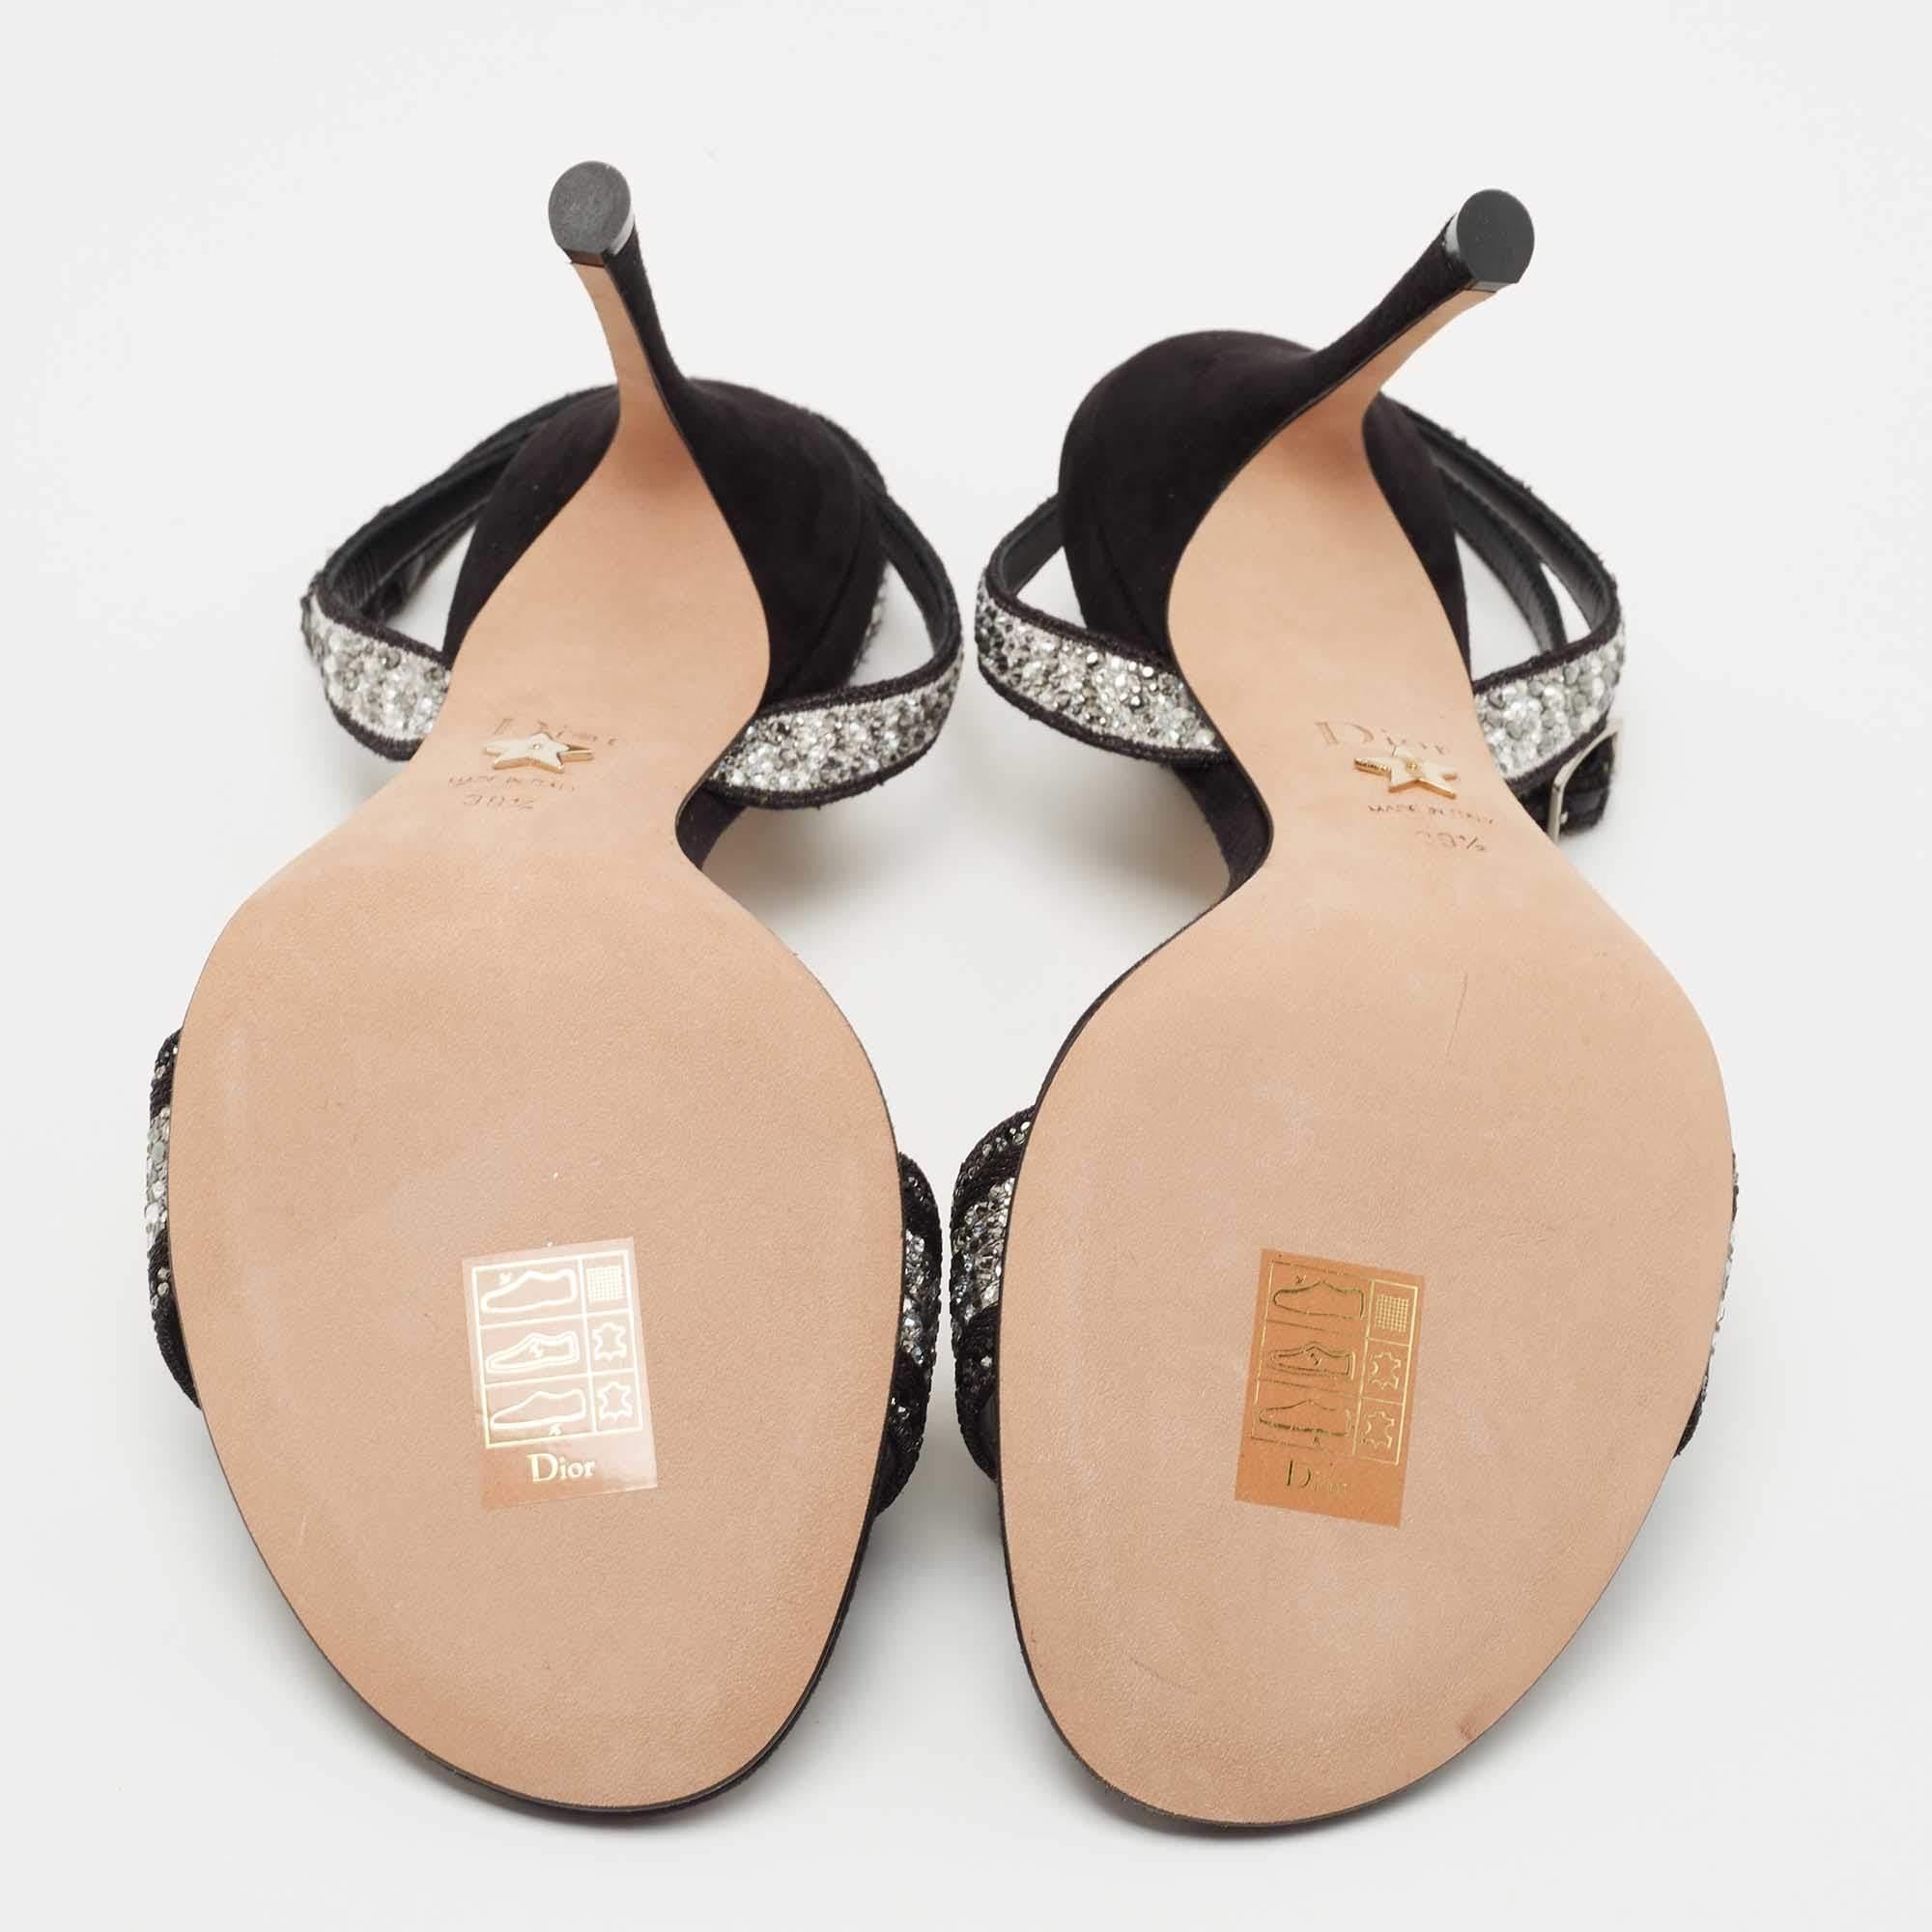 Wear these designer sandals to spruce up any outfit. They are versatile, chic, and can be easily styled. Made using quality materials, these sandals are well-built and long-lasting.